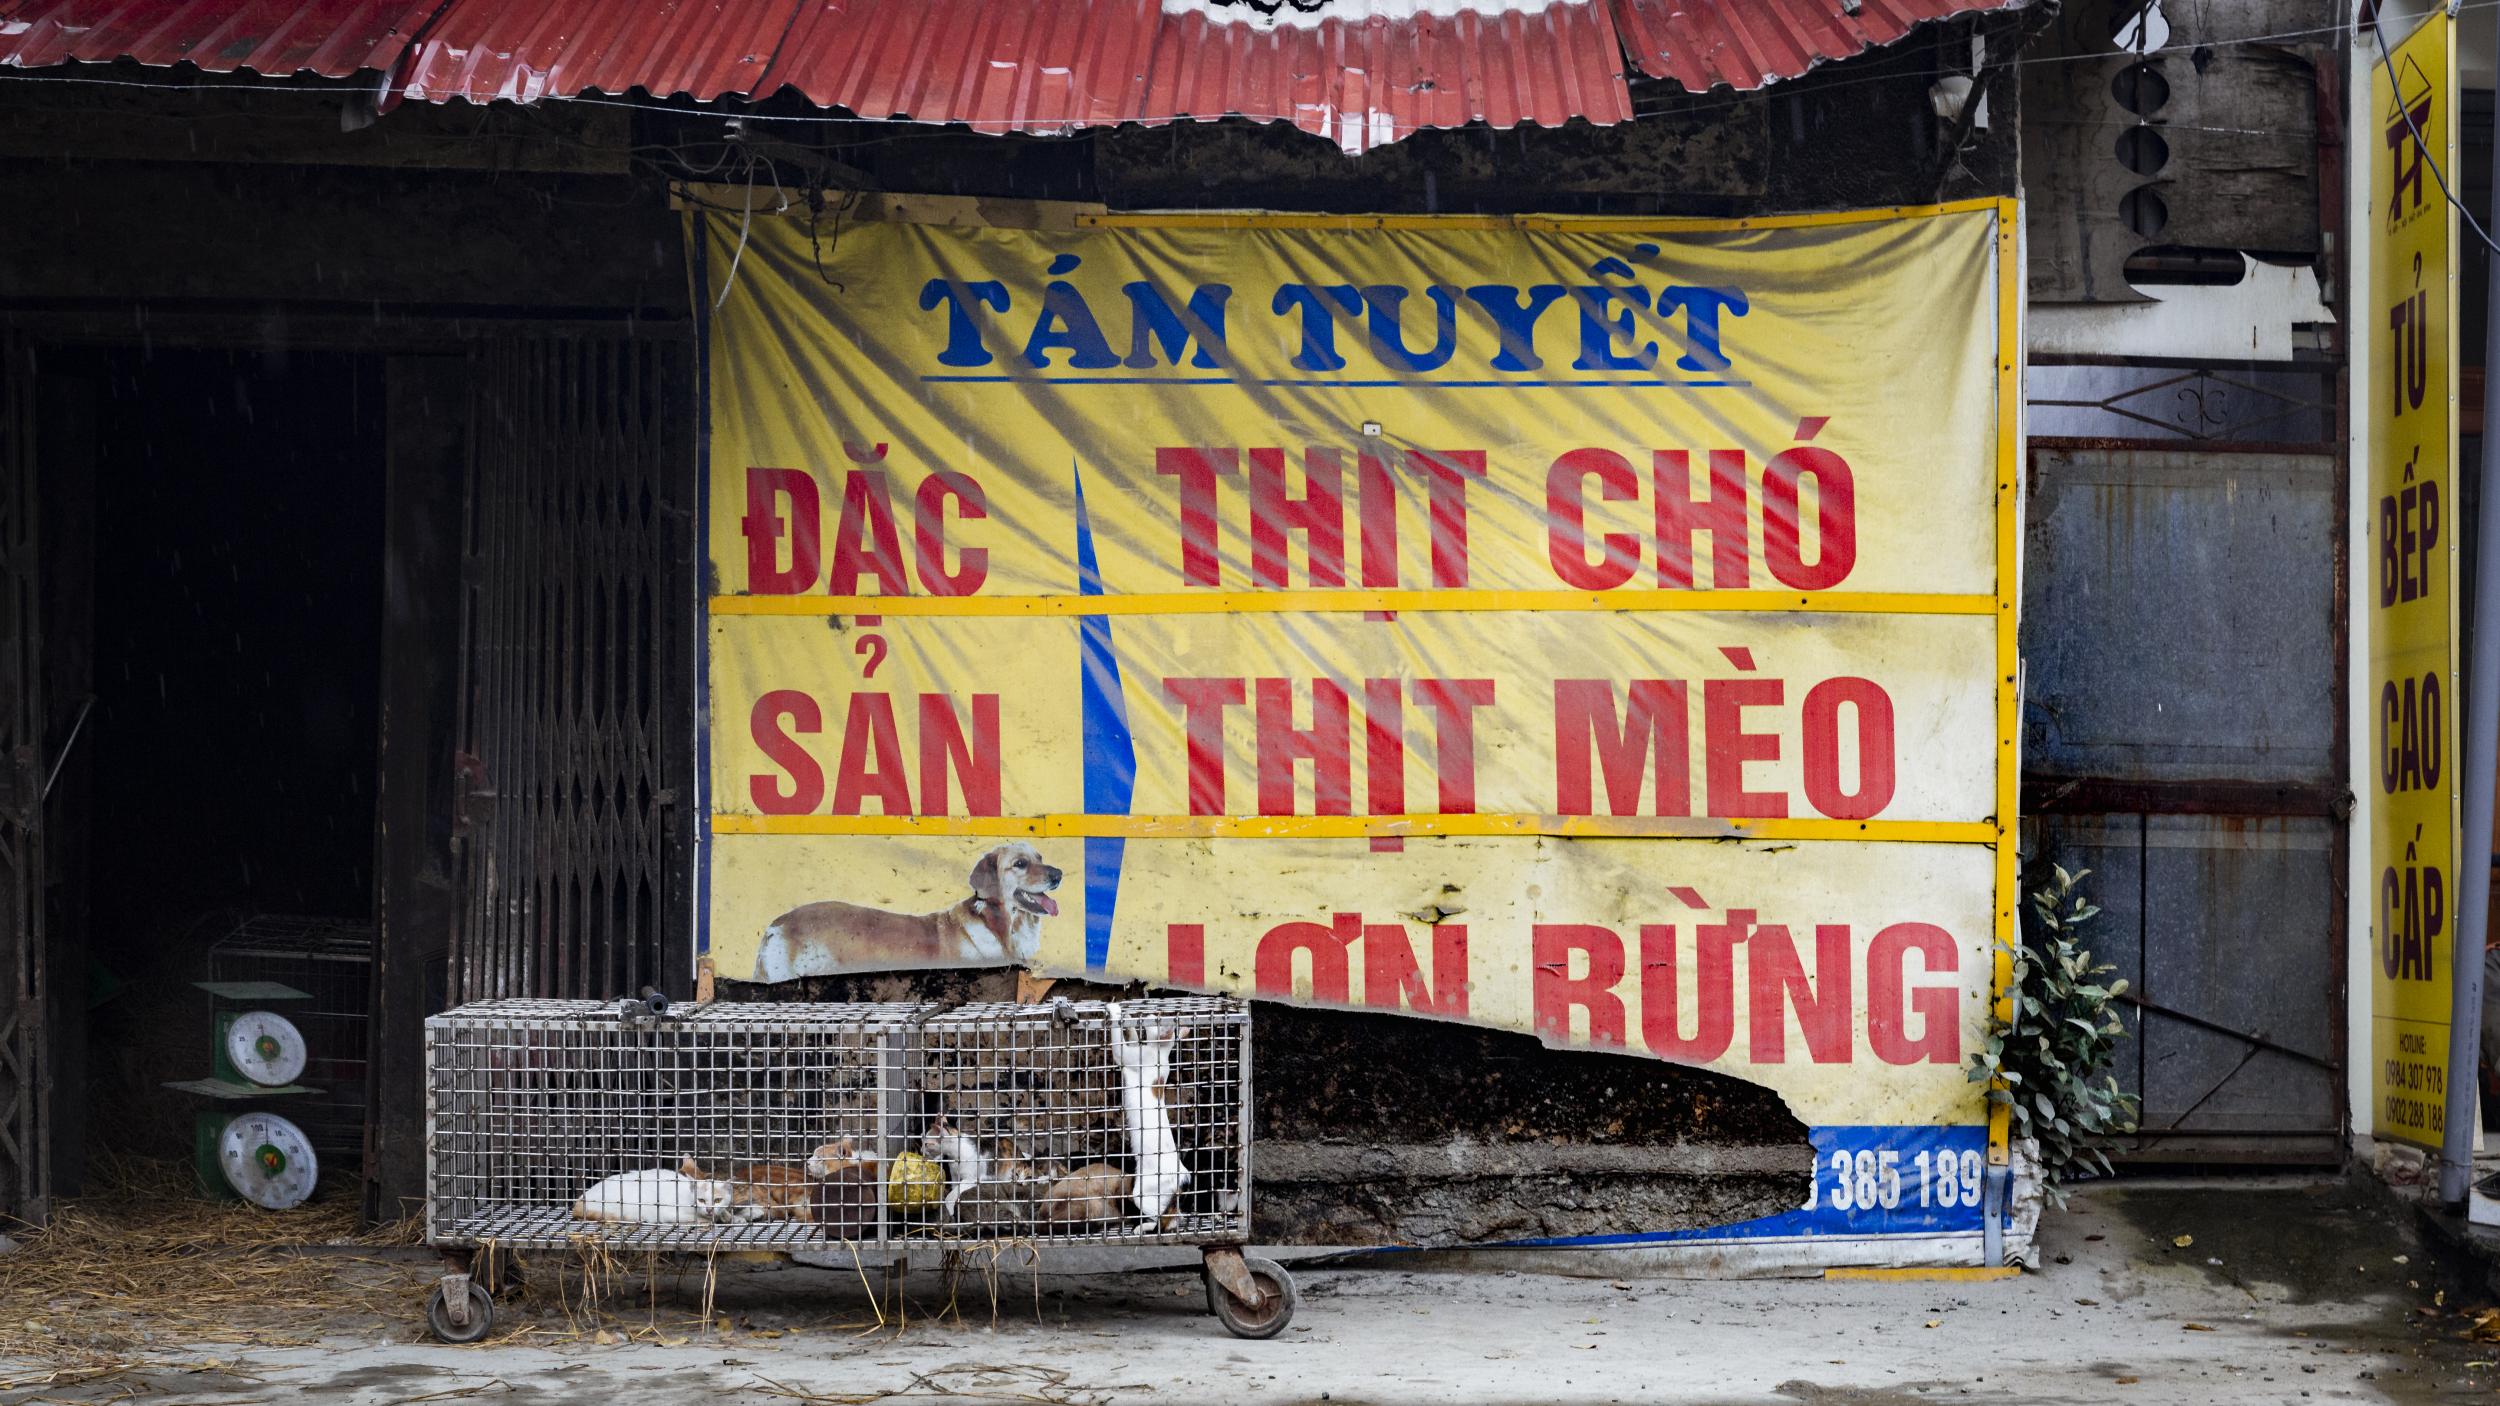 Street signs advertise dog and cat meat